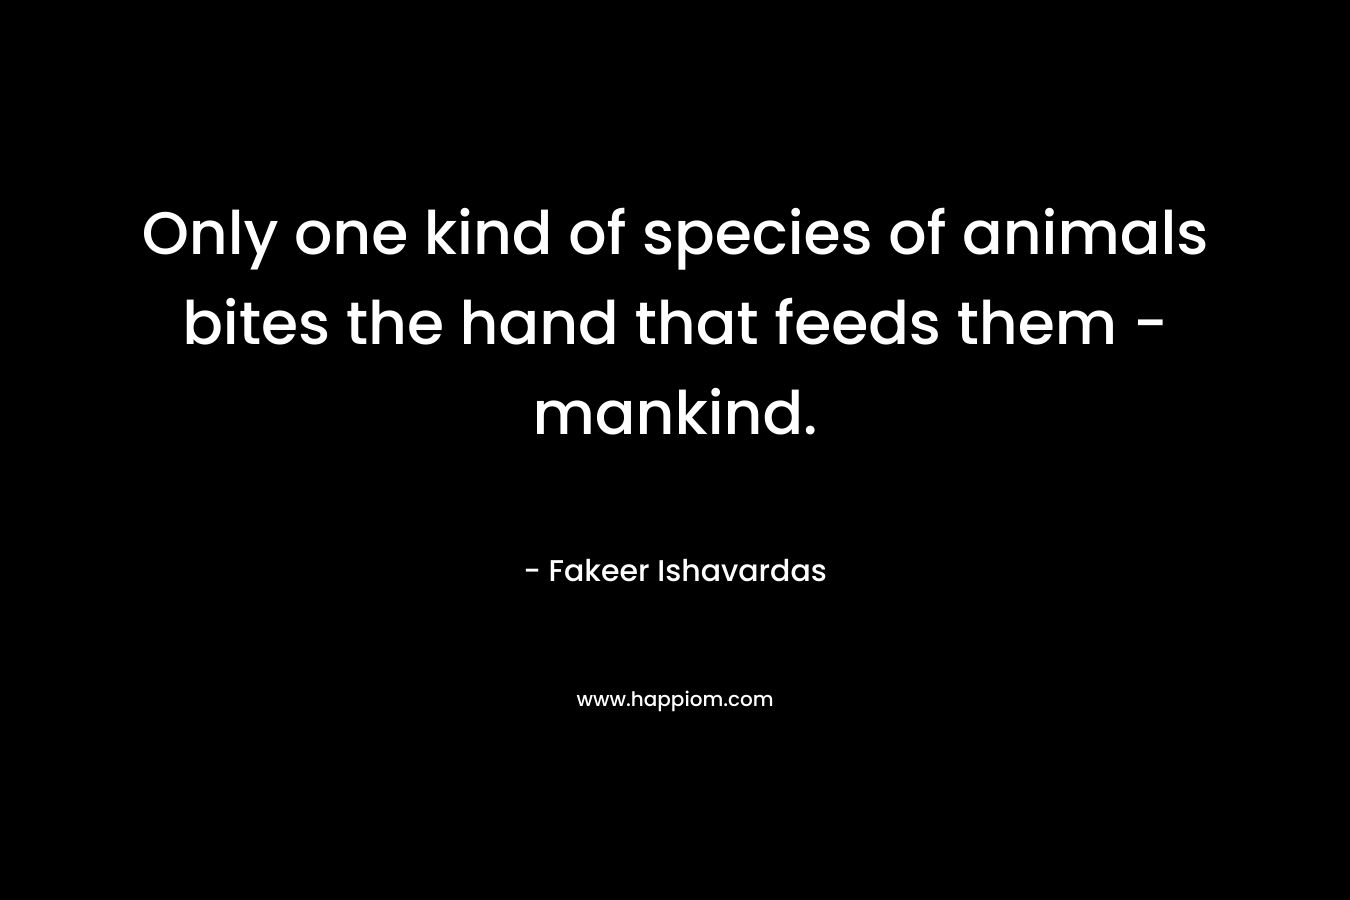 Only one kind of species of animals bites the hand that feeds them – mankind. – Fakeer Ishavardas